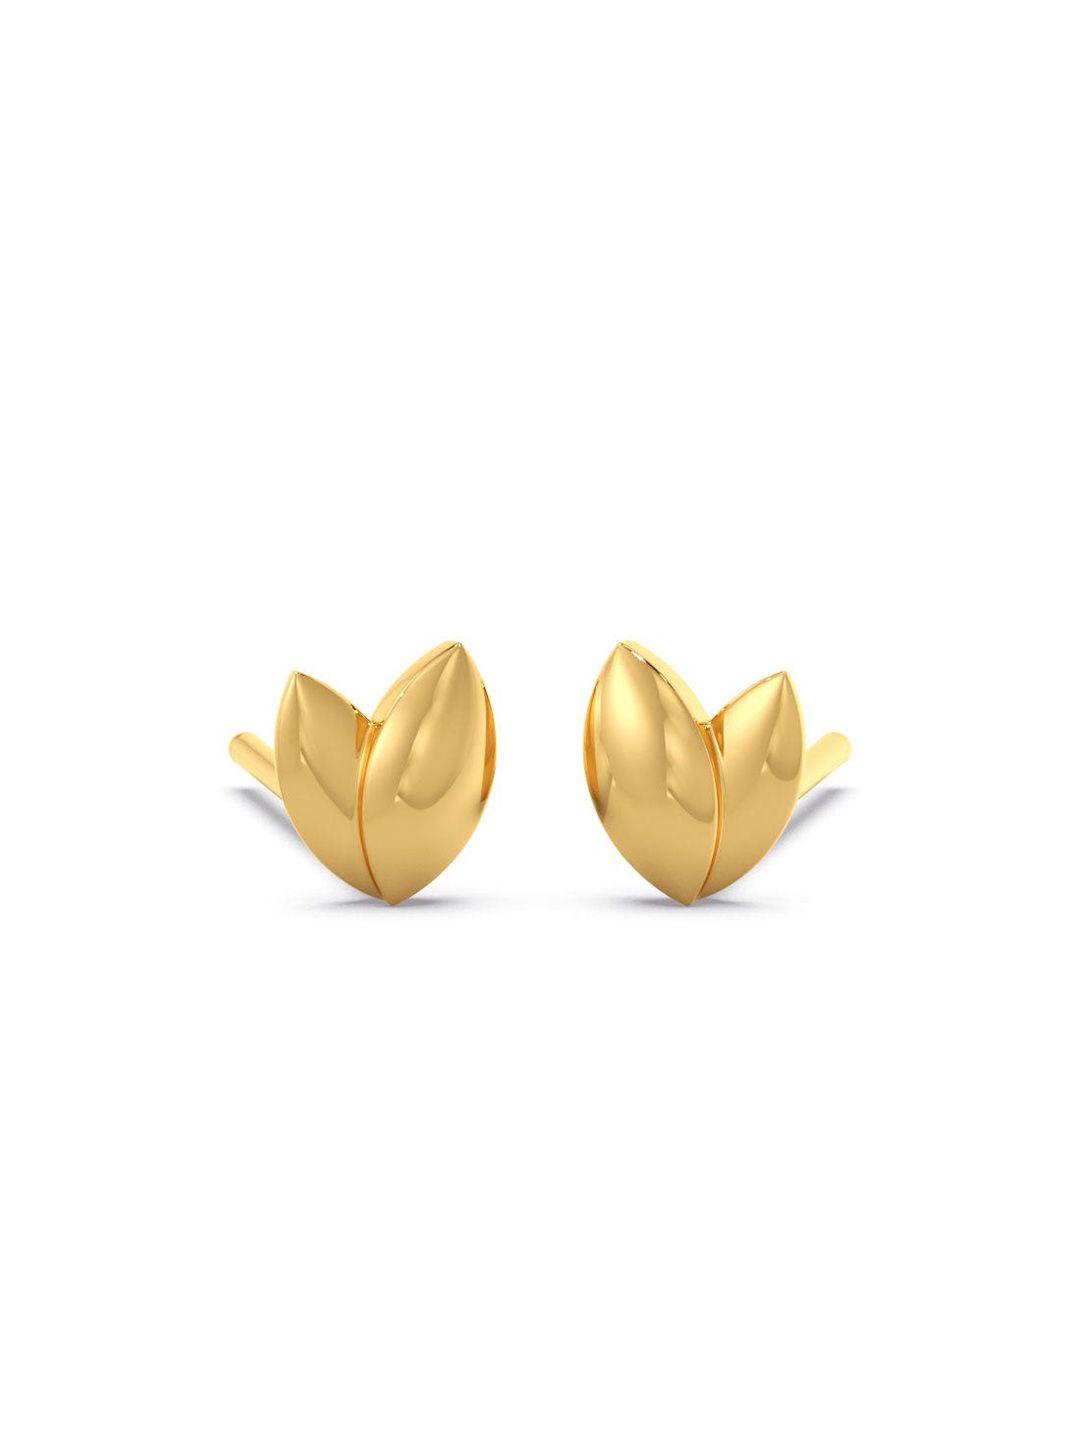 candere-a-kalyan-jewellers-company-14kt-gold-earrings-0.31gm